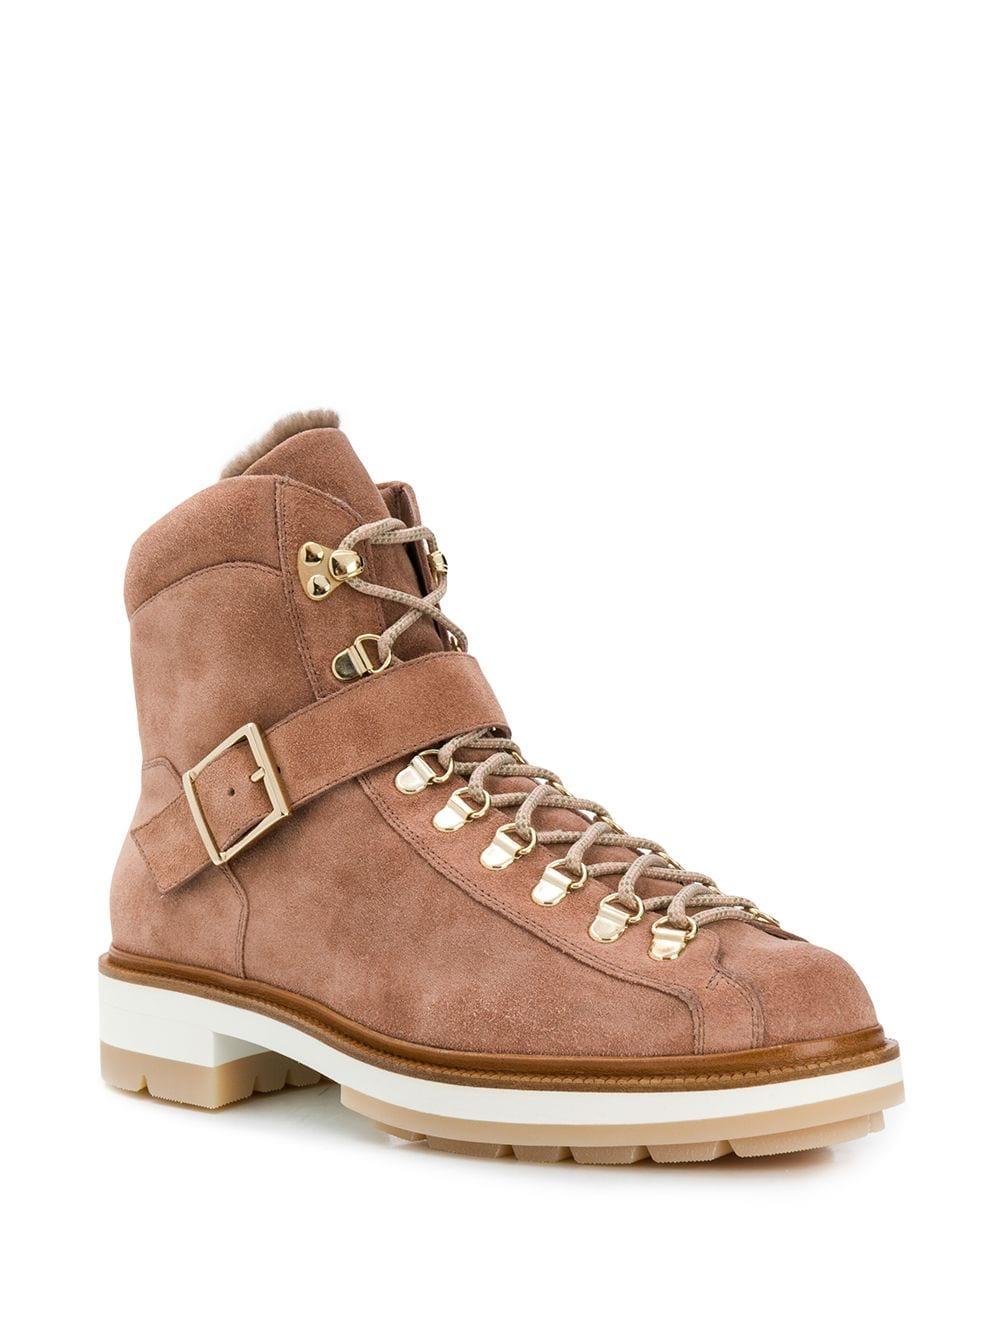 Santoni Suede Hiker-style Boots in Brown - Lyst